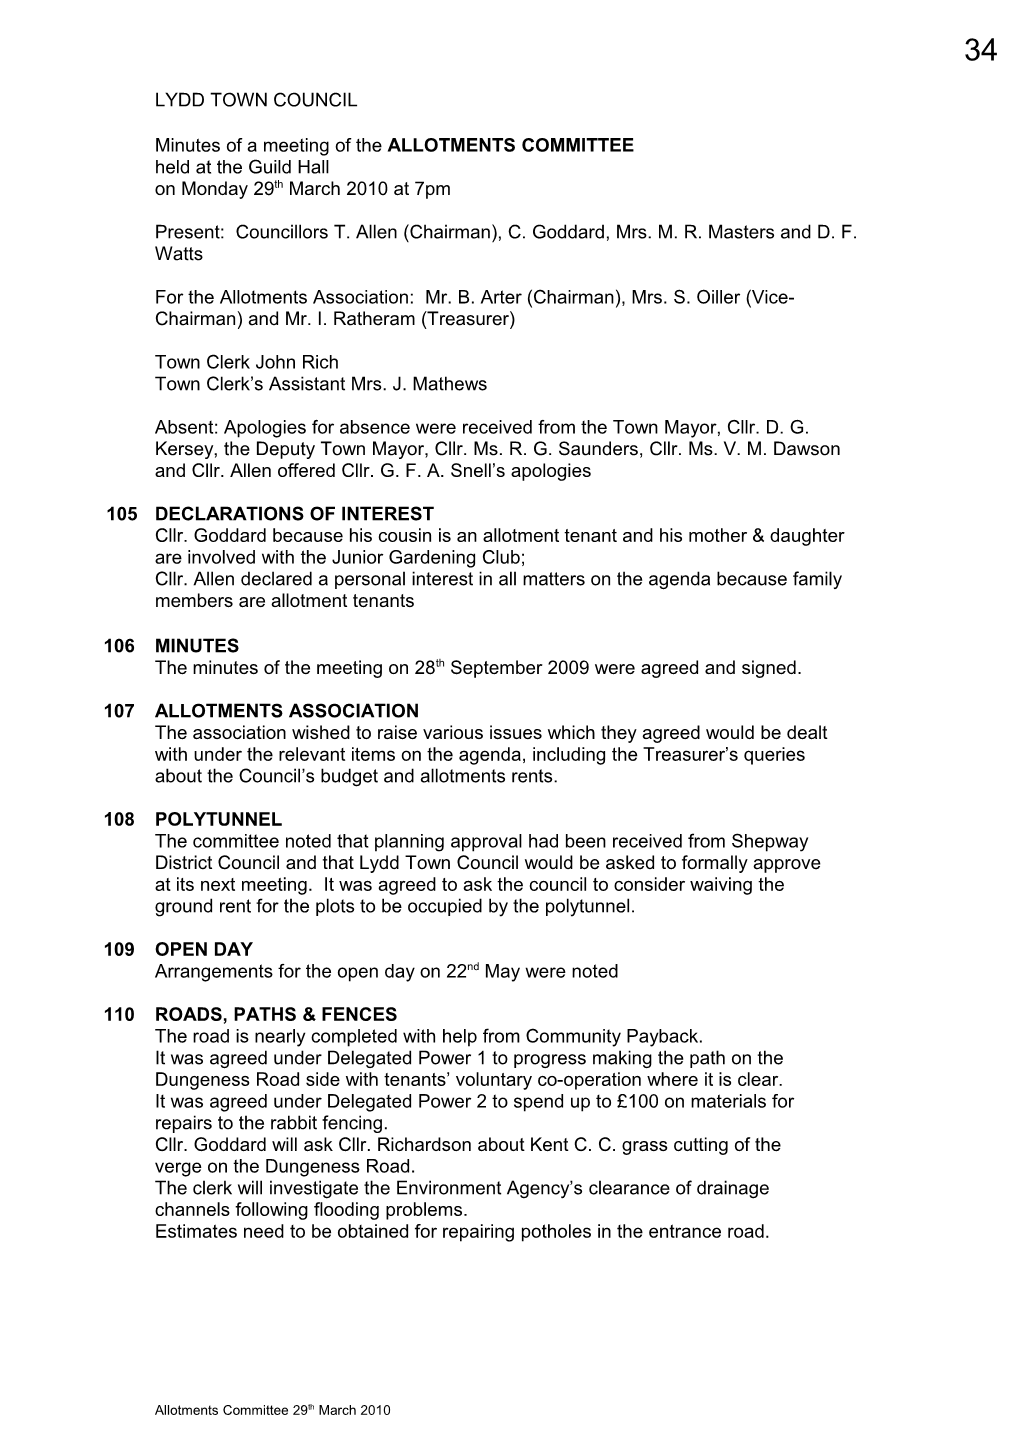 Minutes of a Meeting of the ALLOTMENTS COMMITTEE